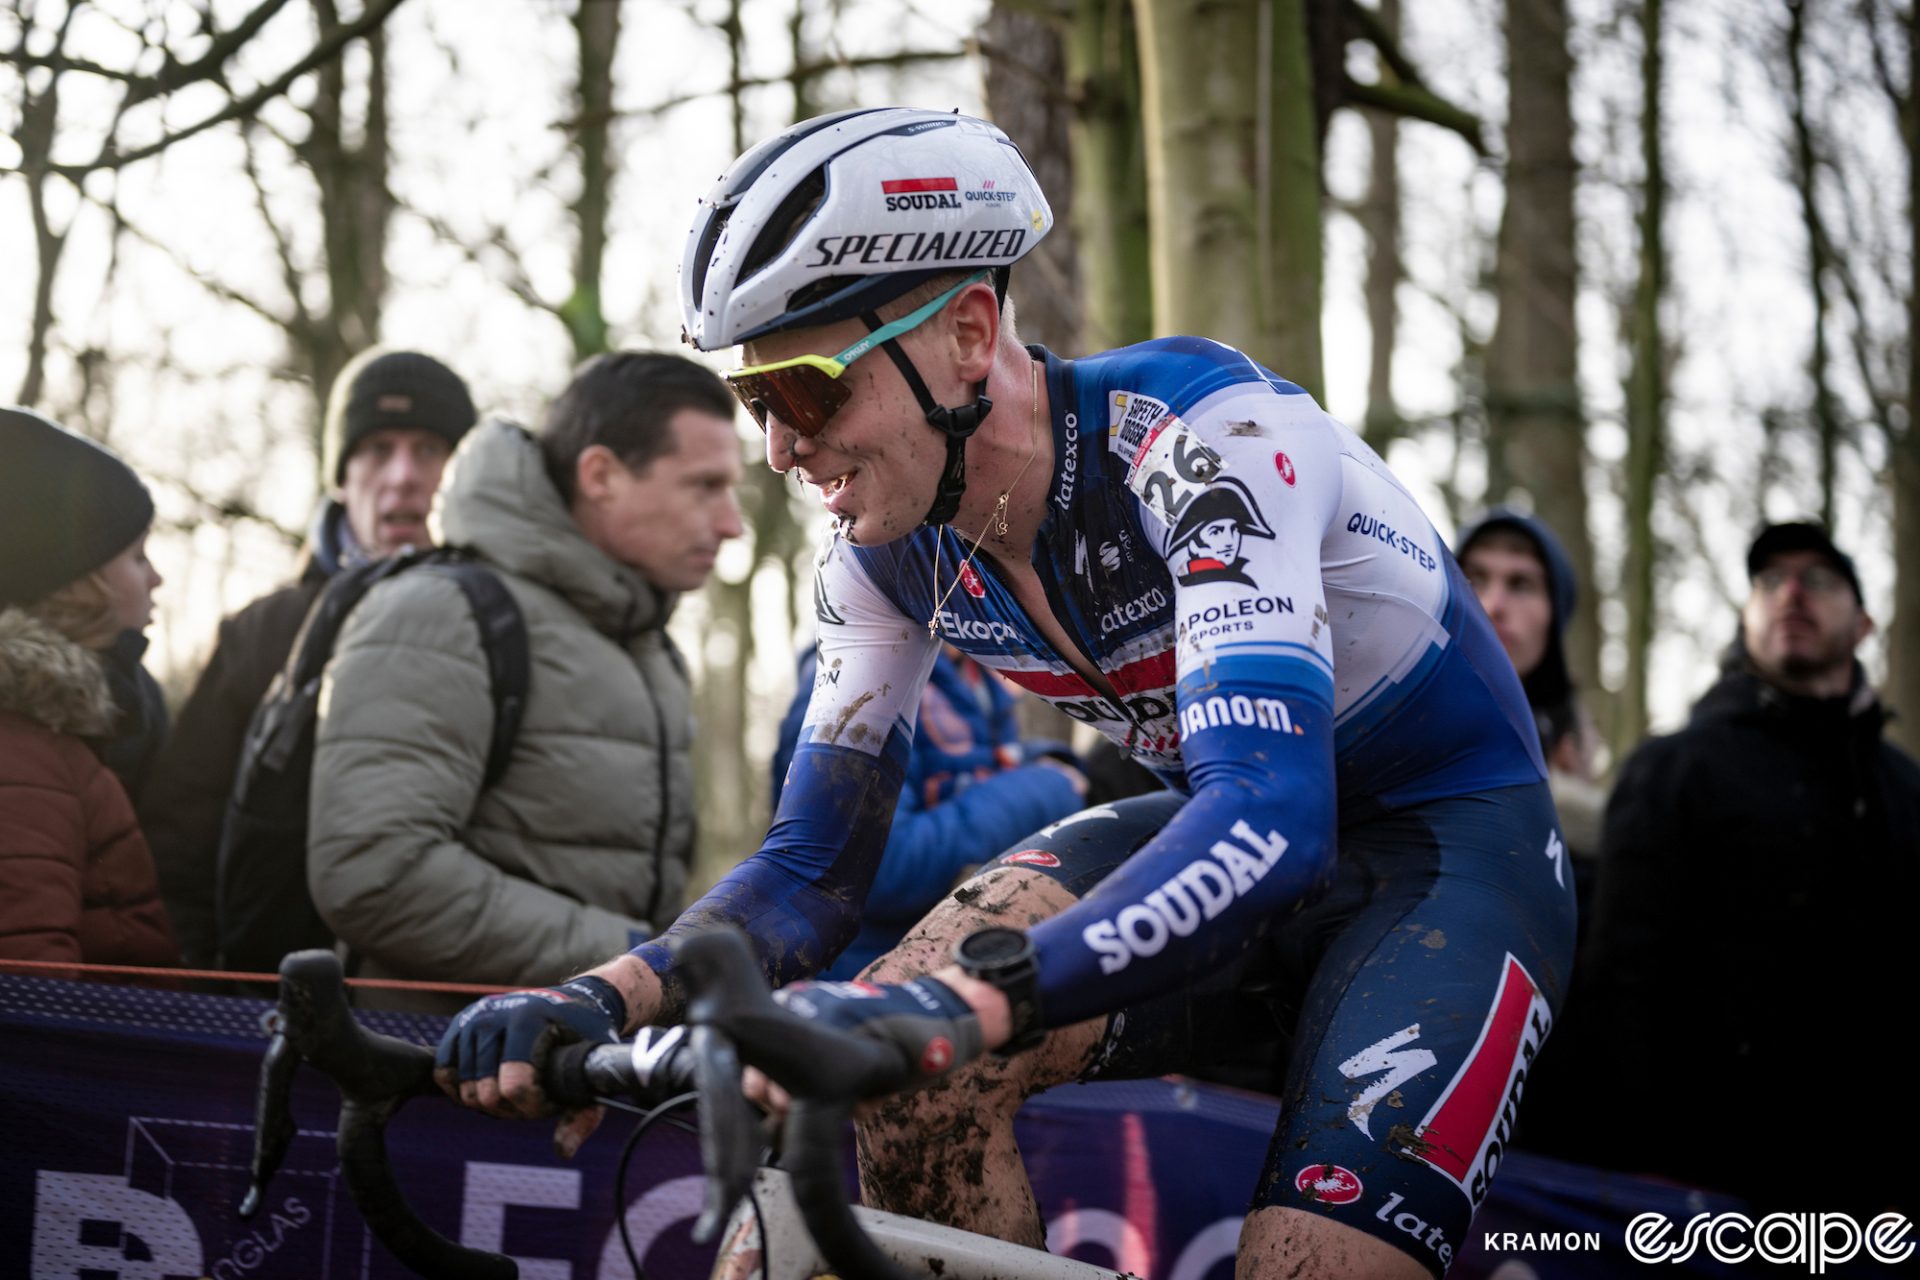 Tim Merlier grins or grimaces as he climbs a muddy section at Gavere.